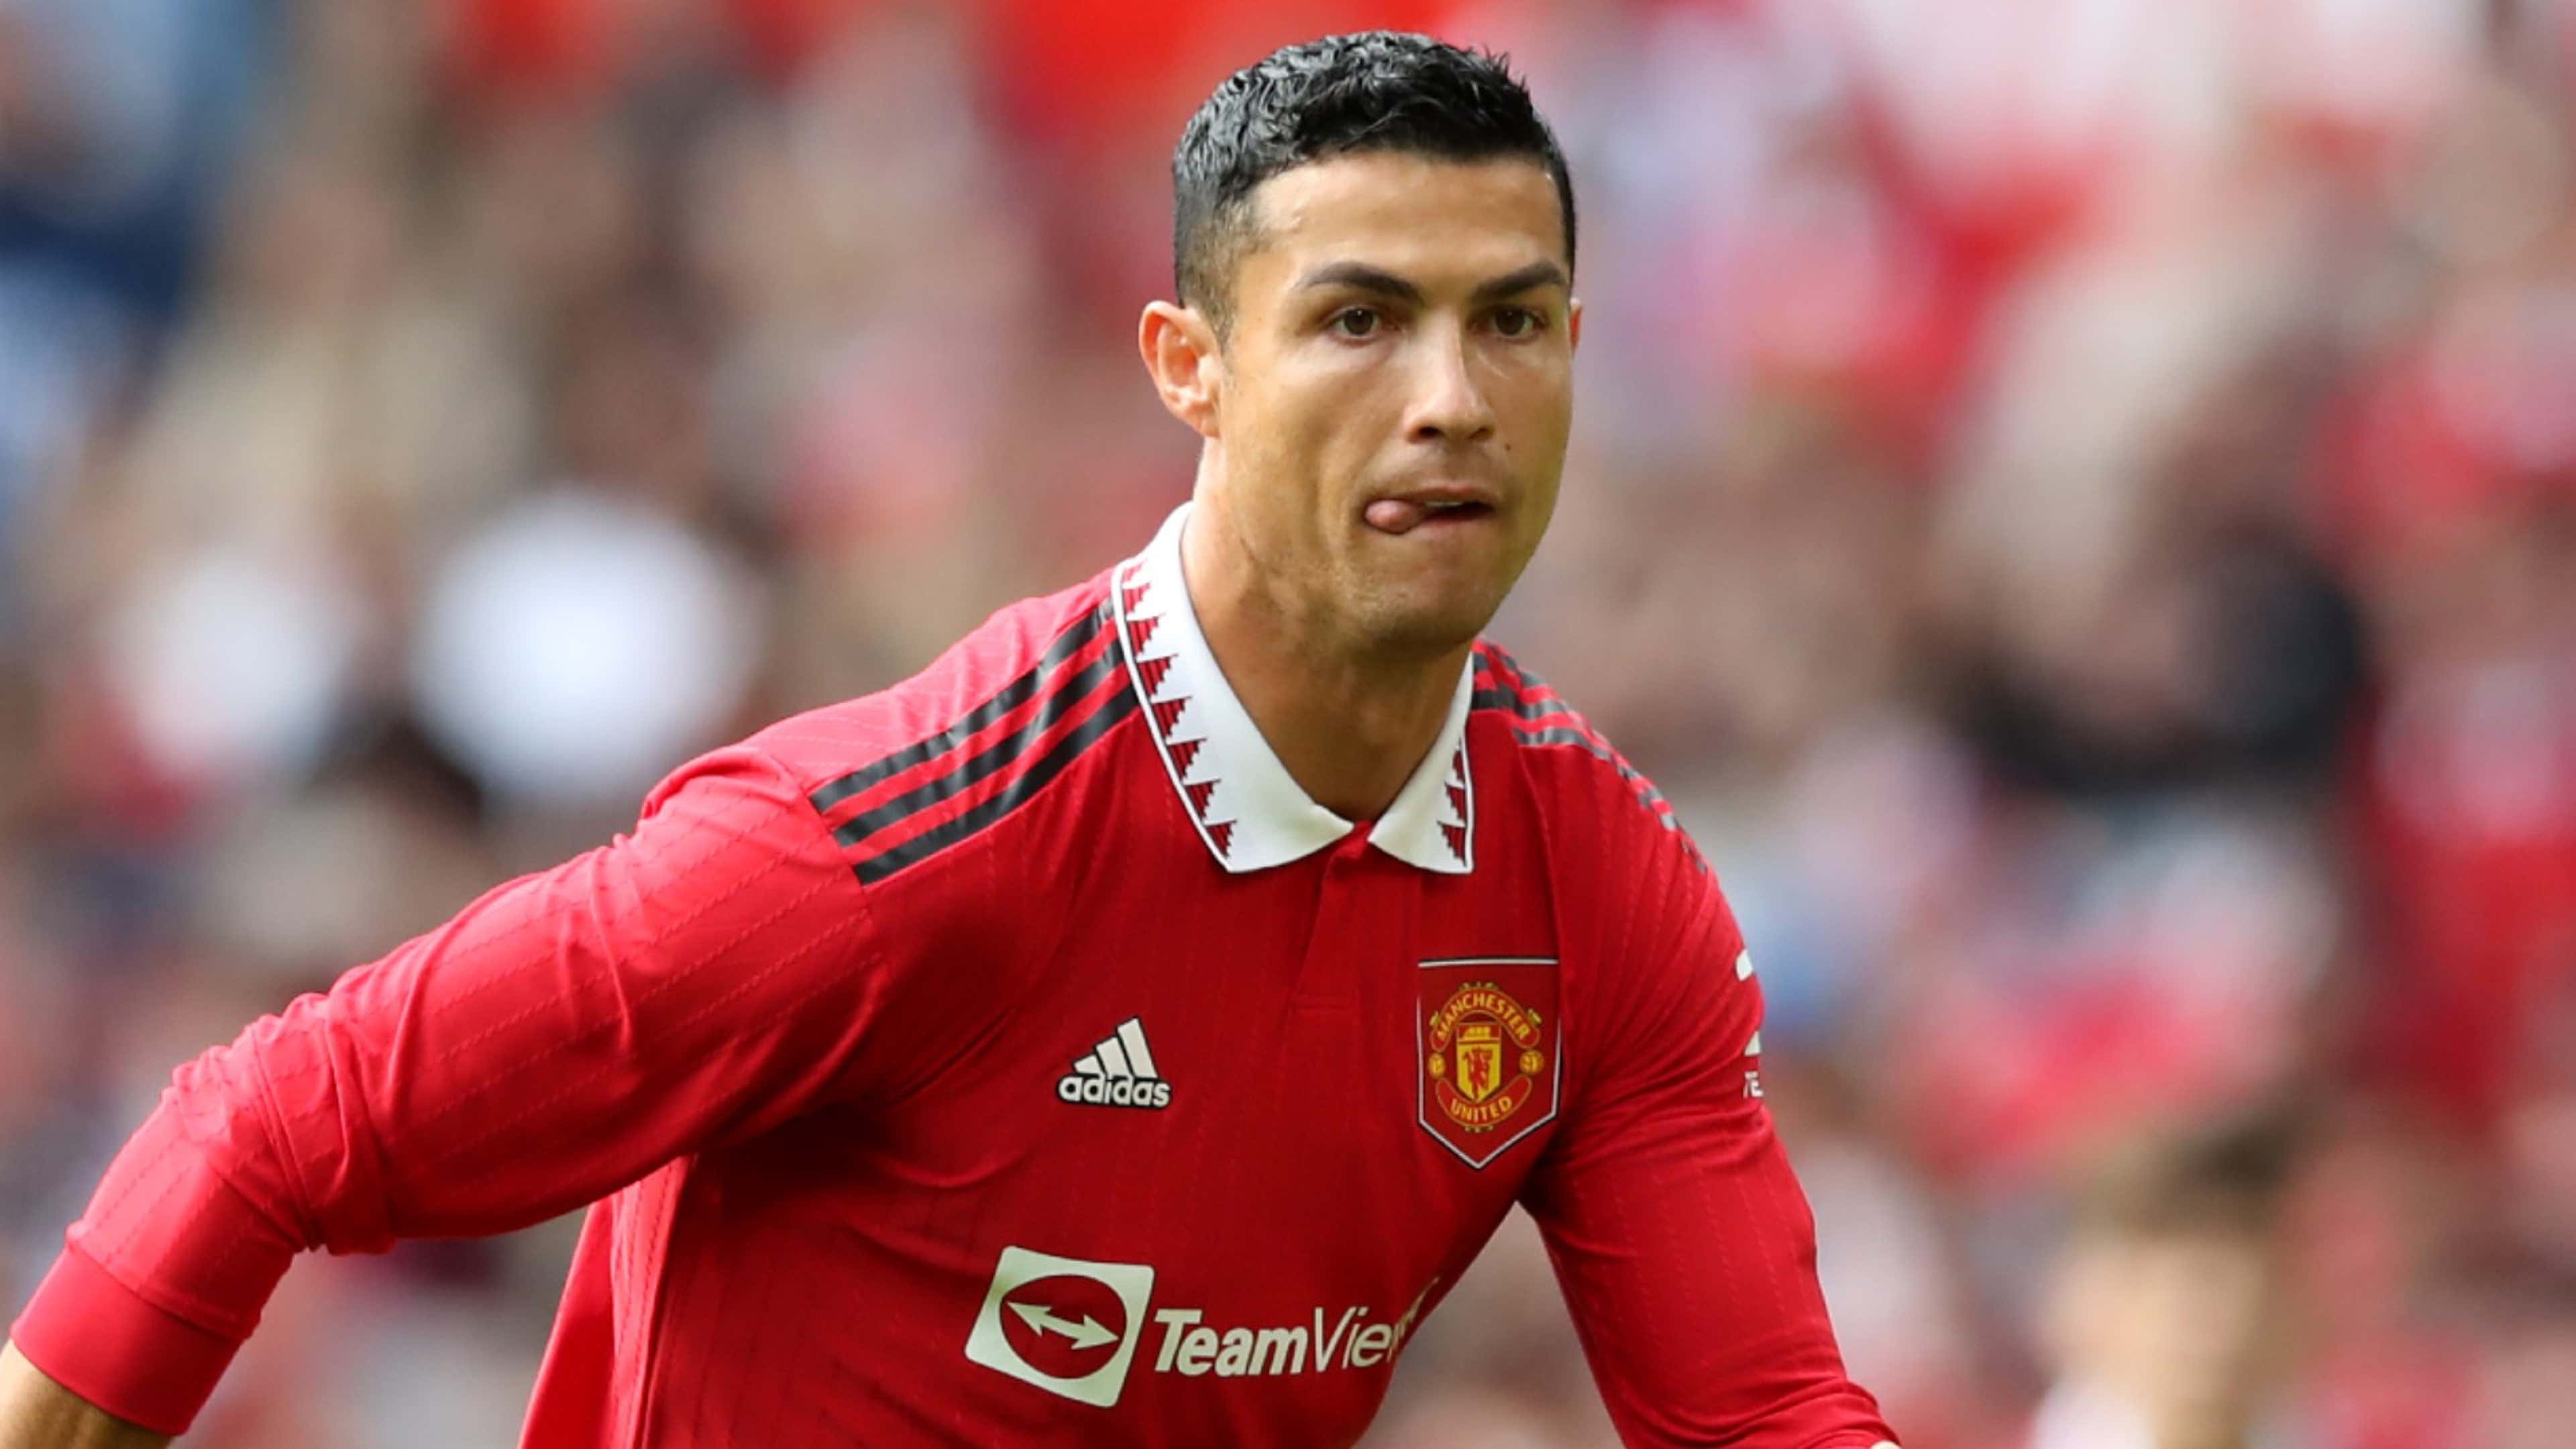 Cristiano Ronaldo Returns to Manchester United - The New York Times